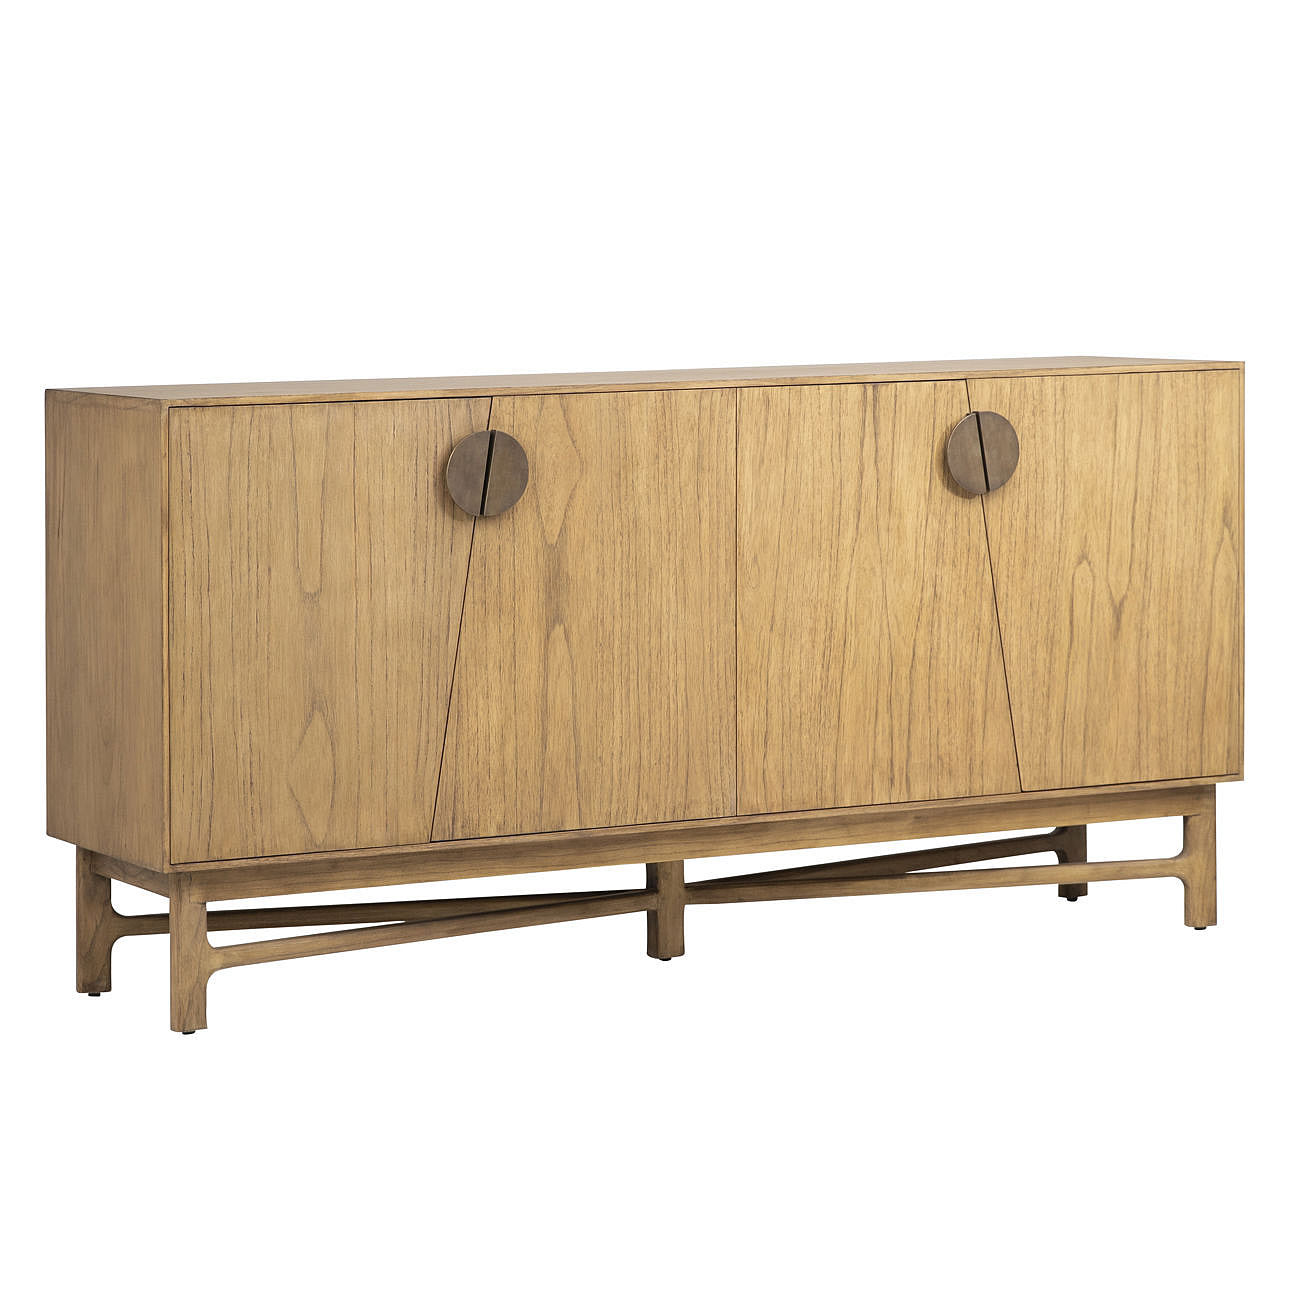 genova-mcm-inspired-natural-mindi-wood-sideboard-with-brass-accent